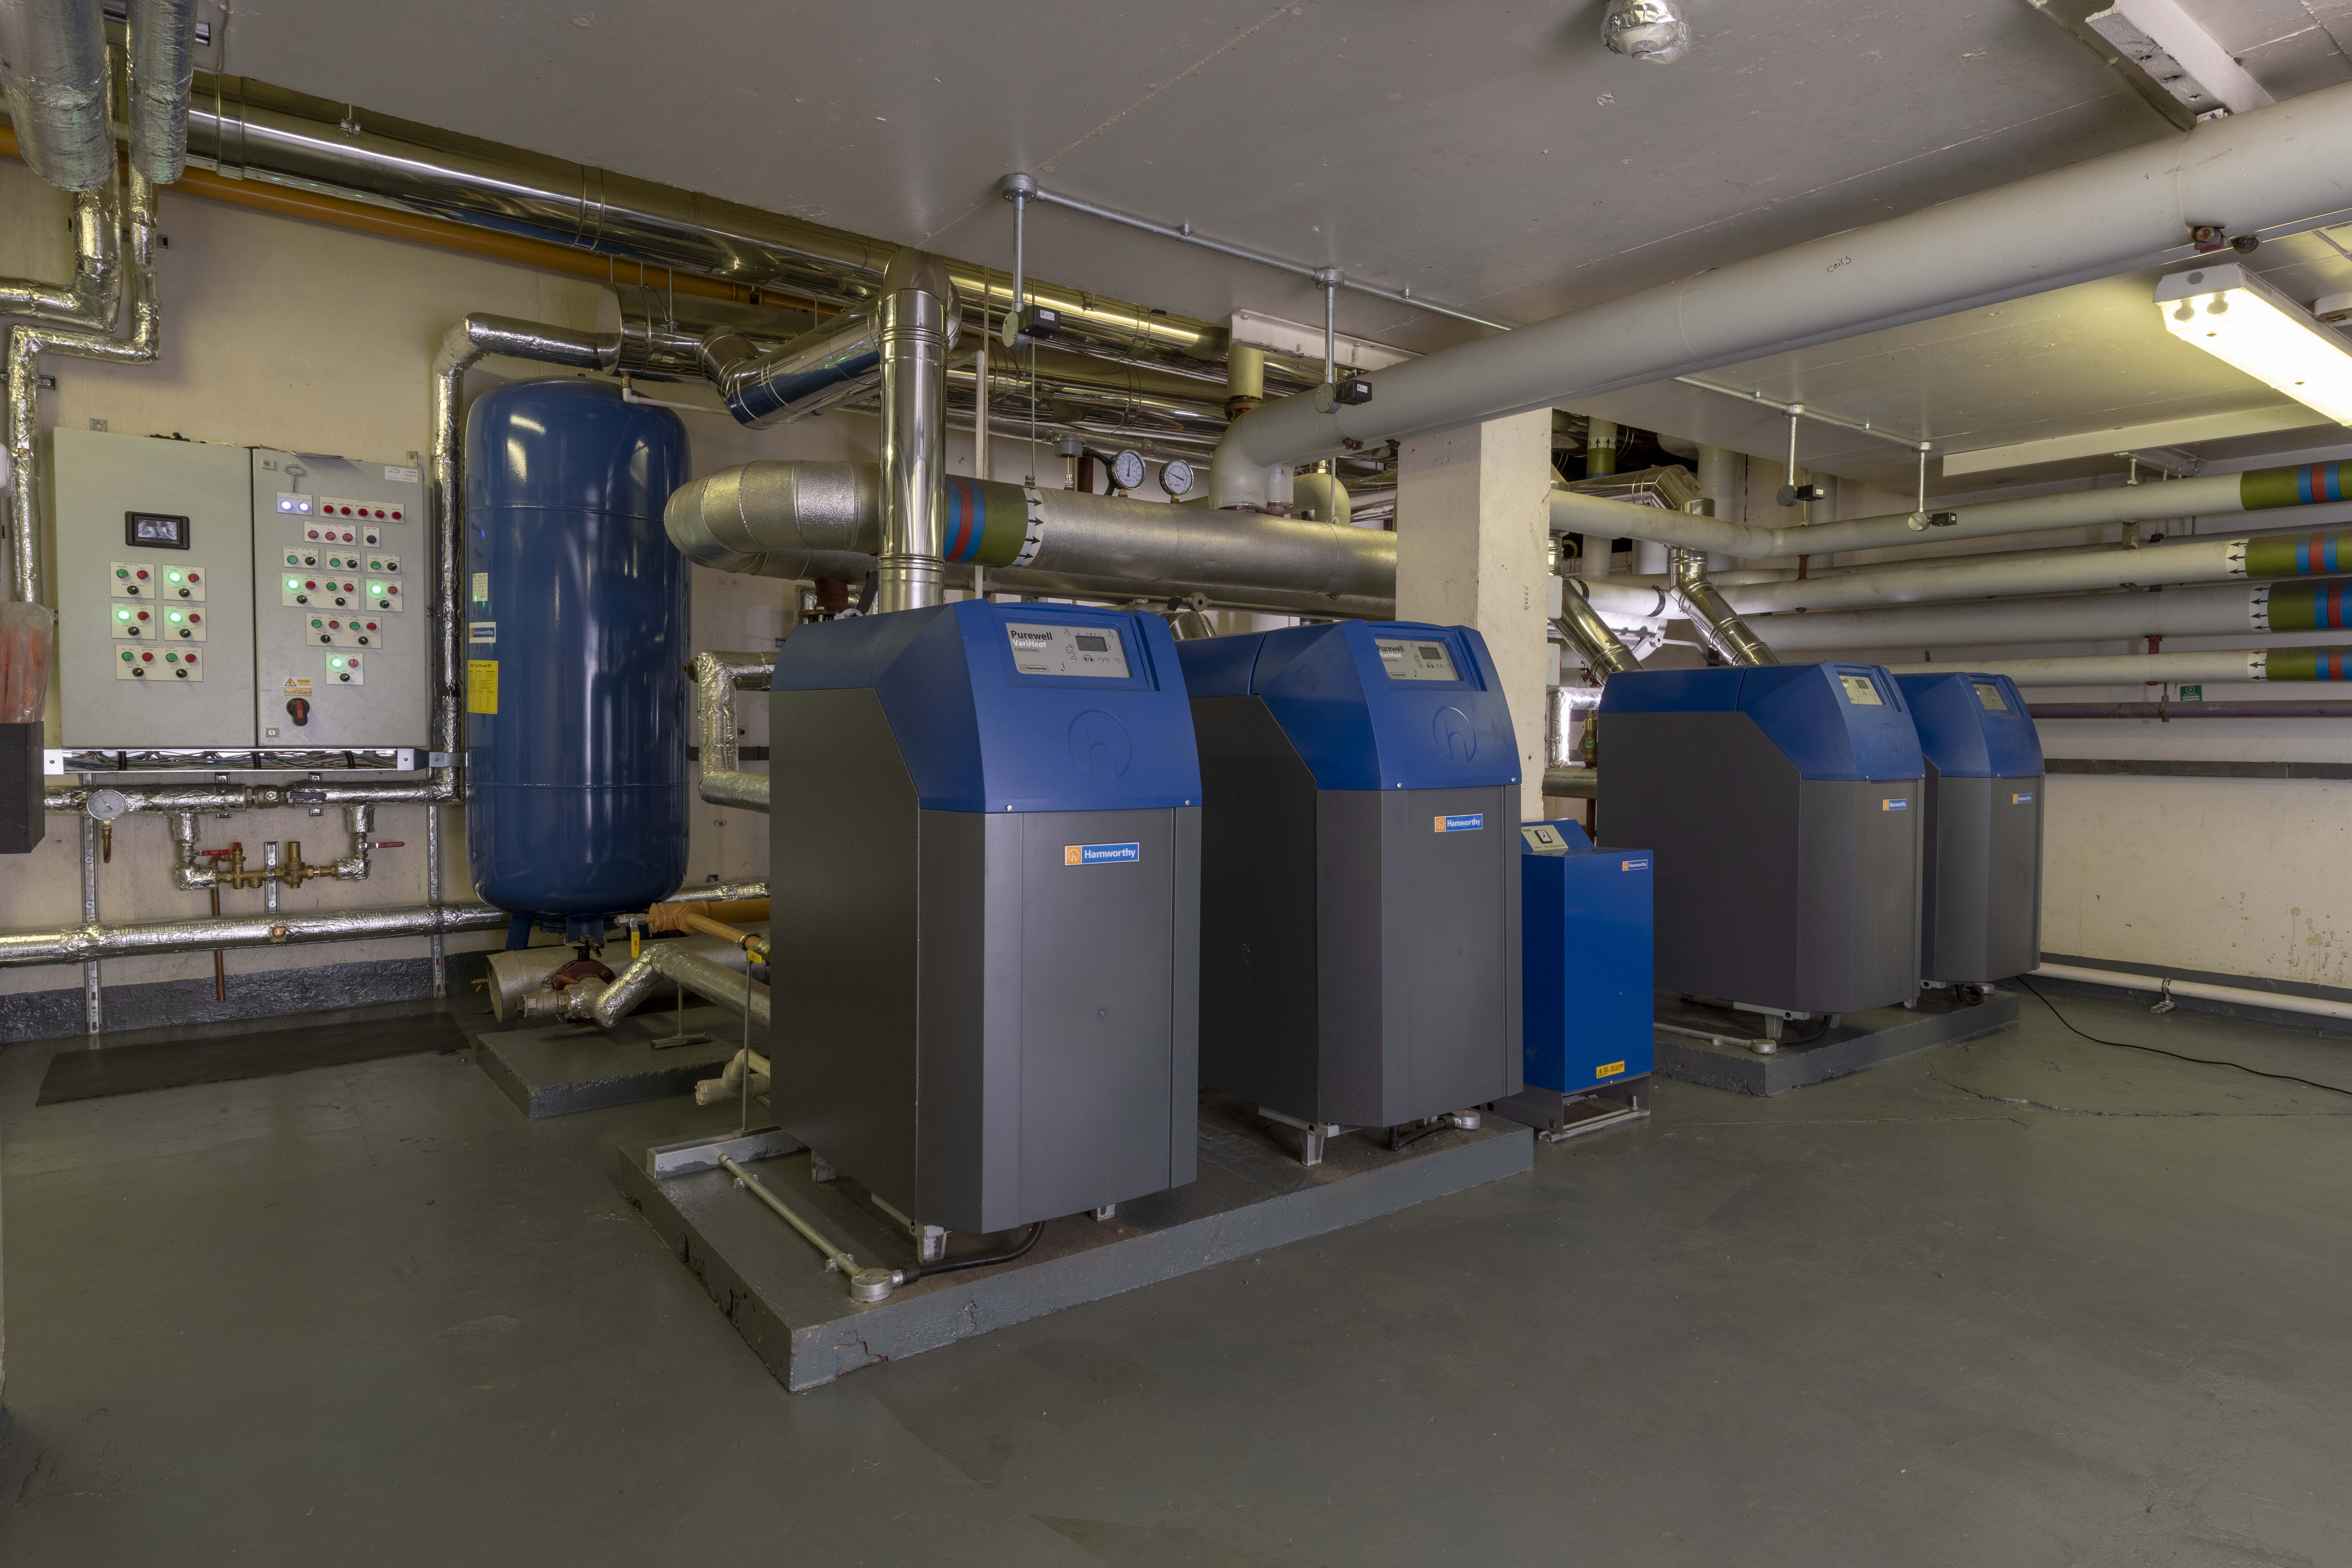 Cast iron boilers and a closed and pressurised heating system.